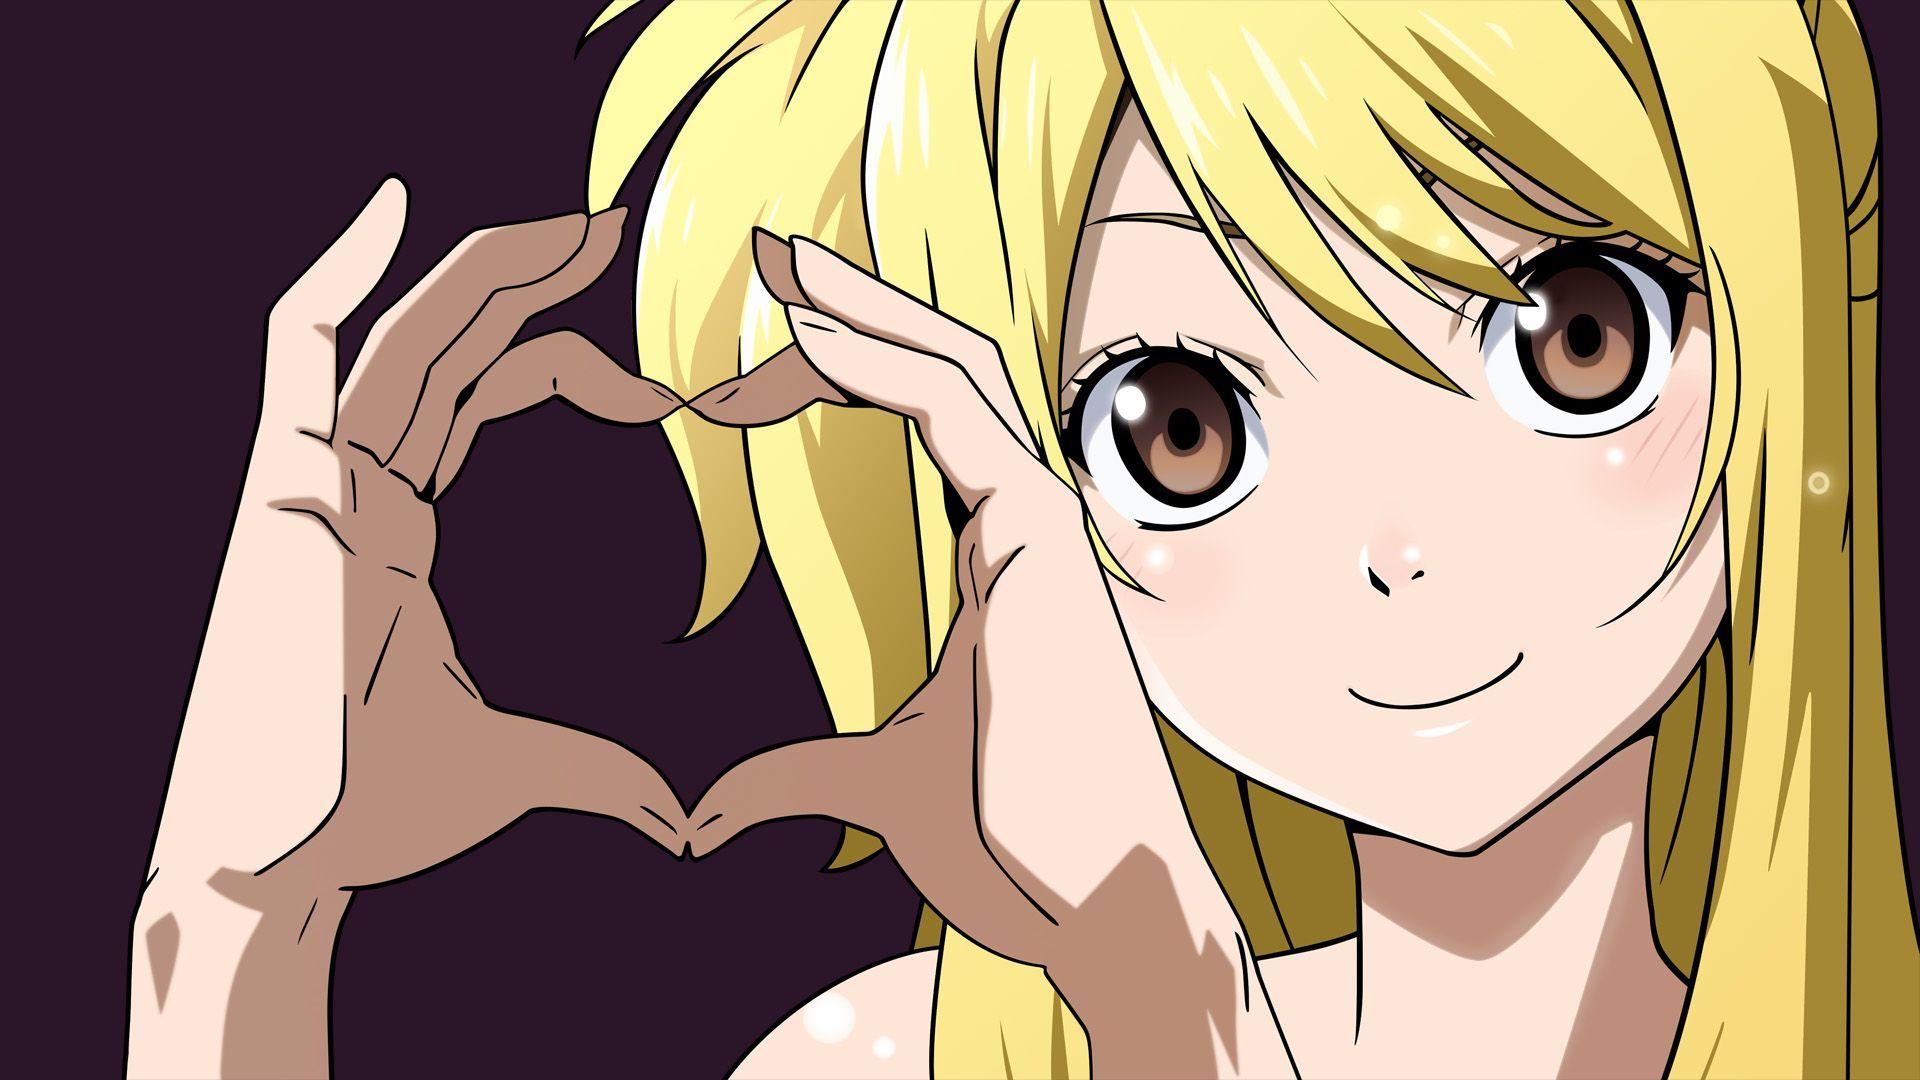 Wallpaper ID 452689  Anime Fairy Tail Phone Wallpaper Lucy Heartfilia  720x1280 free download